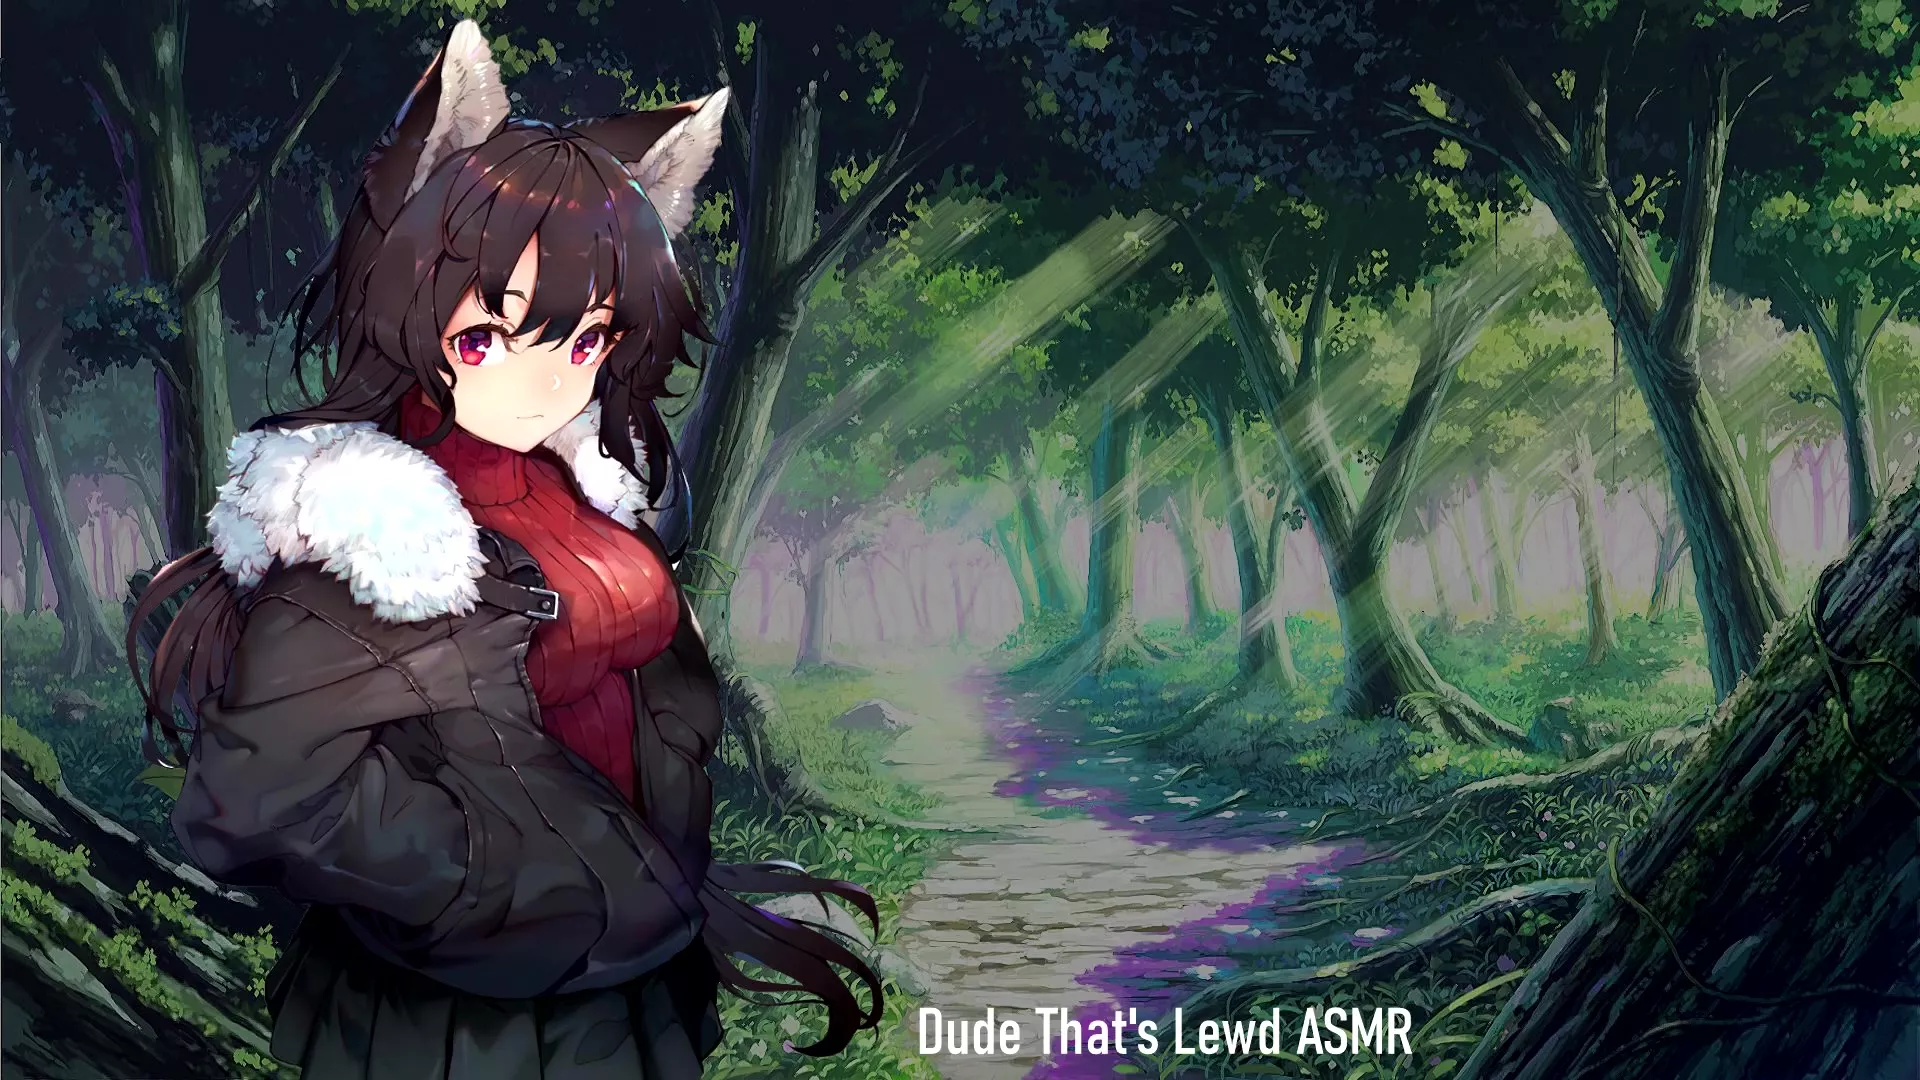 1920px x 1080px - Wolfie just wants your treats ASMR dudetlewd hentai solo female blowjob  free porn videos